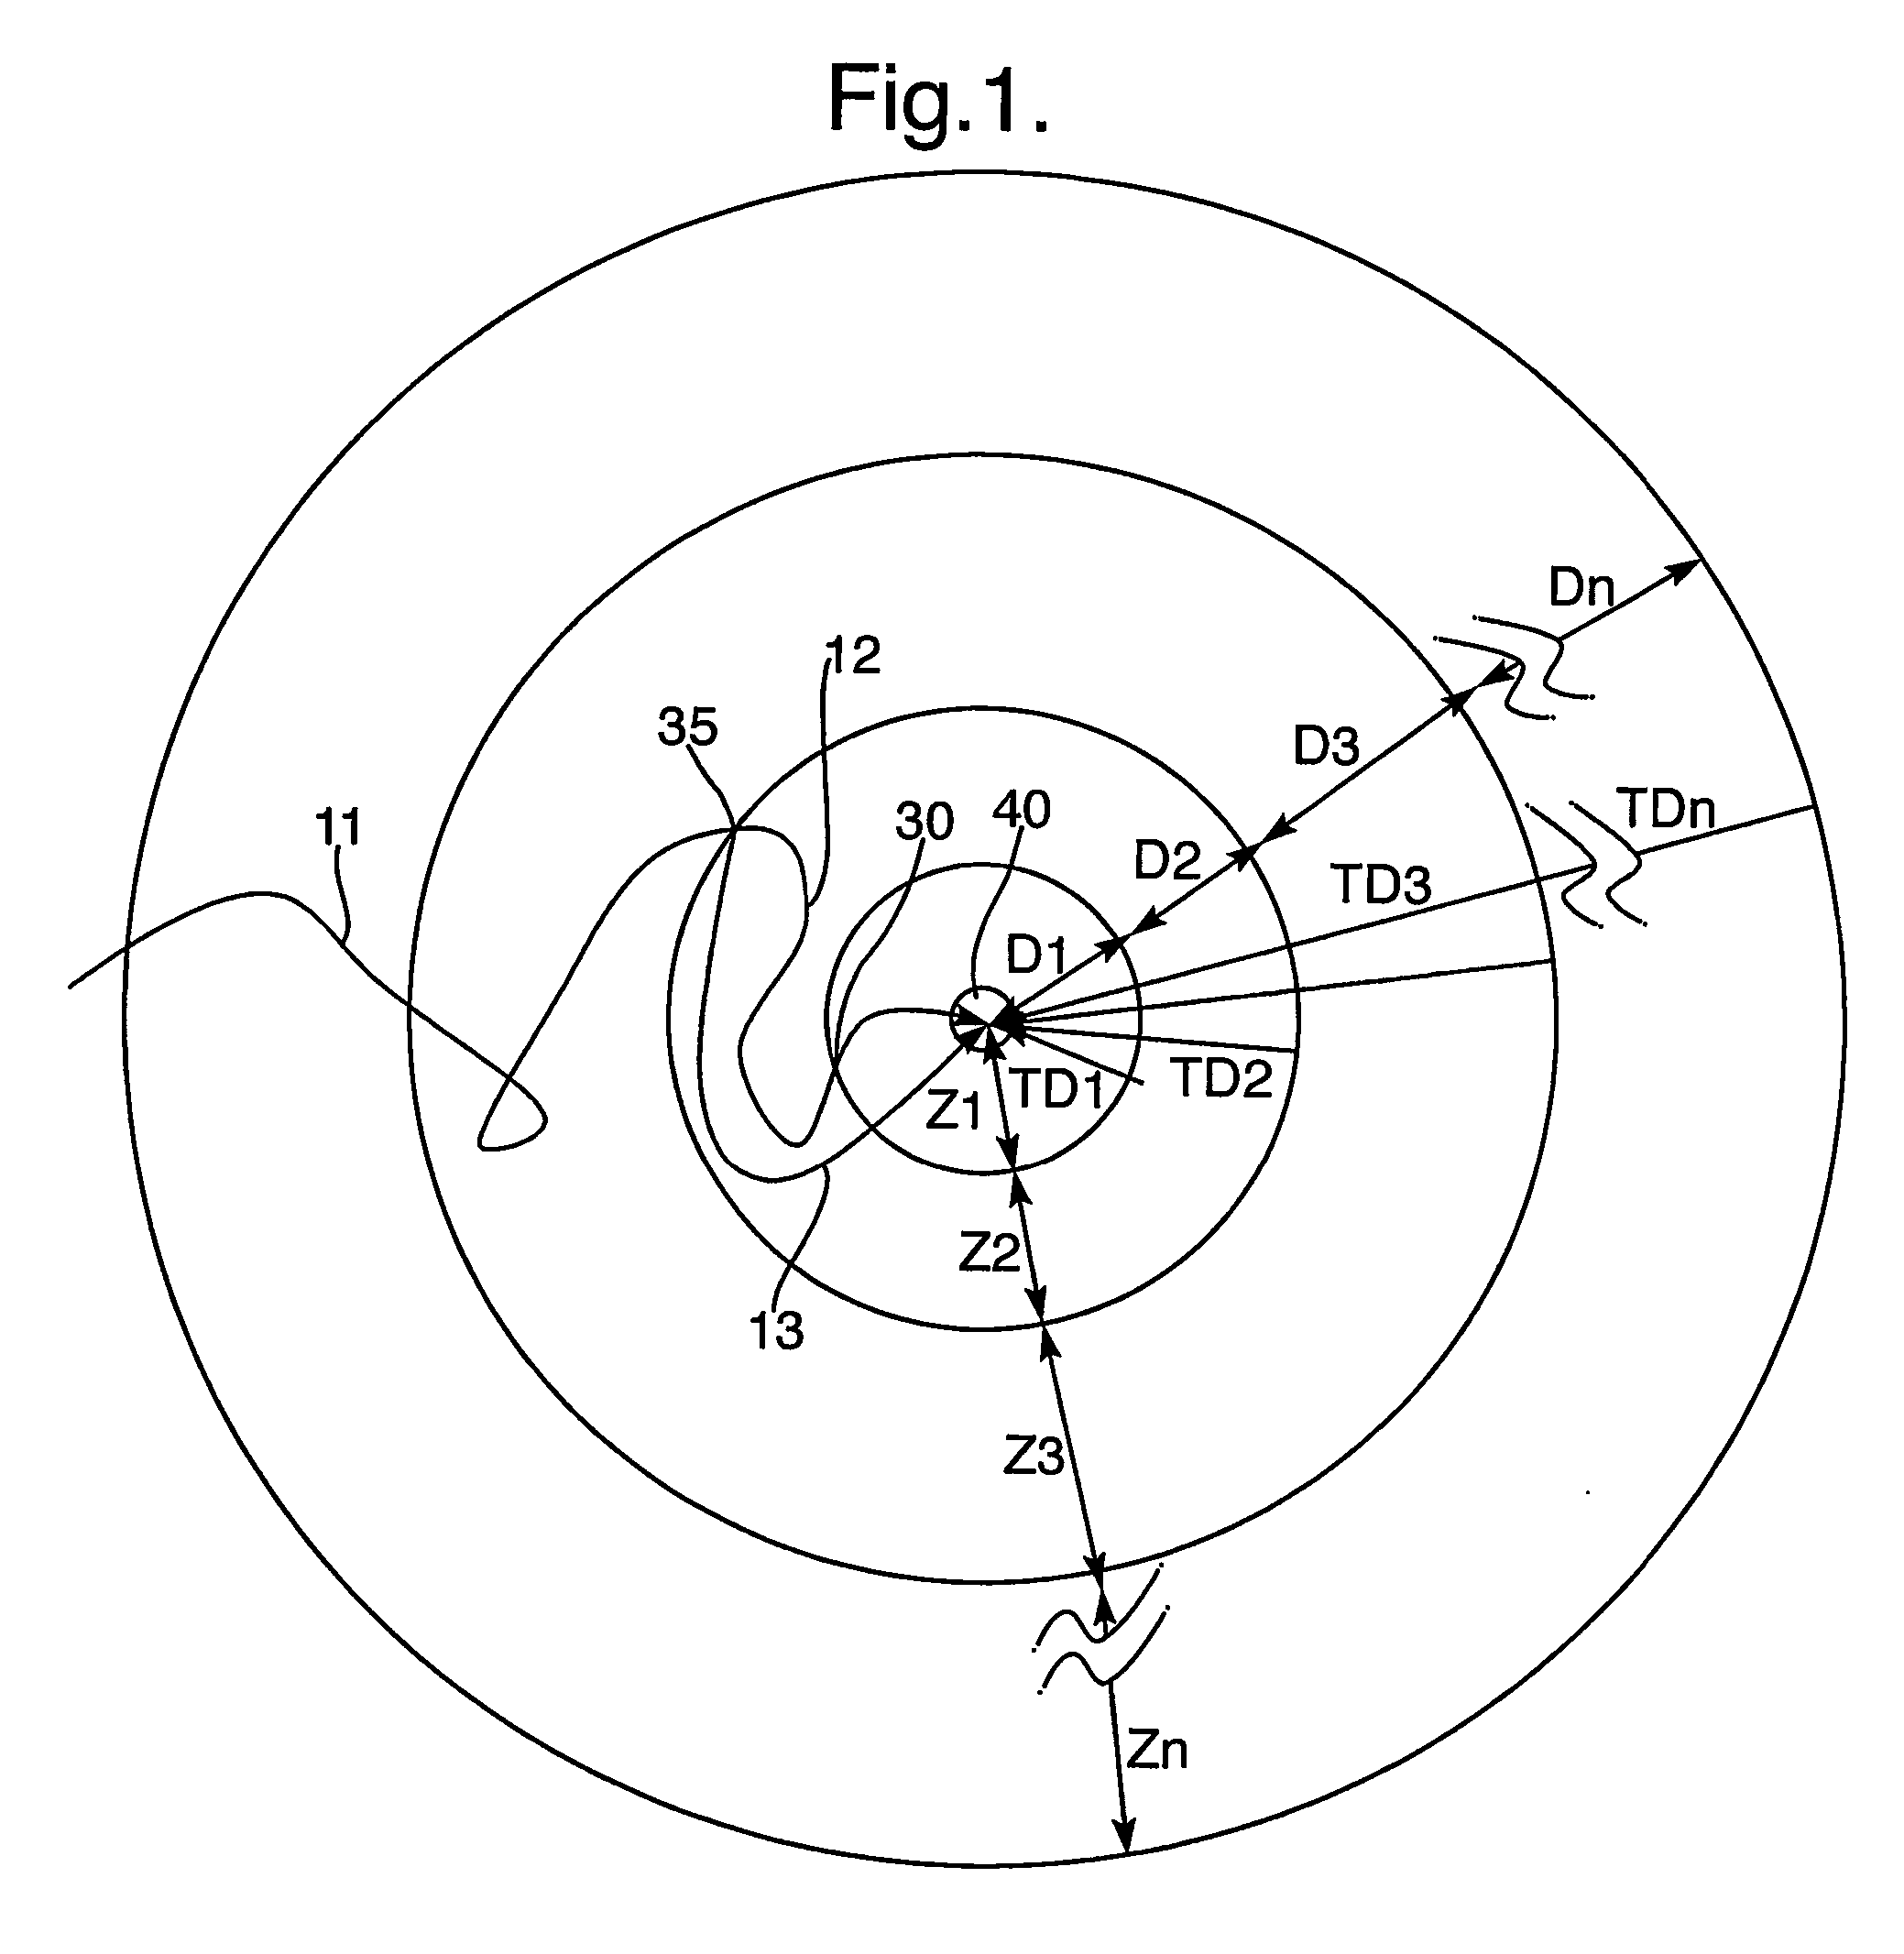 Method and System for Assisting the Passage of an Entity Through Successive Zones to a Destination